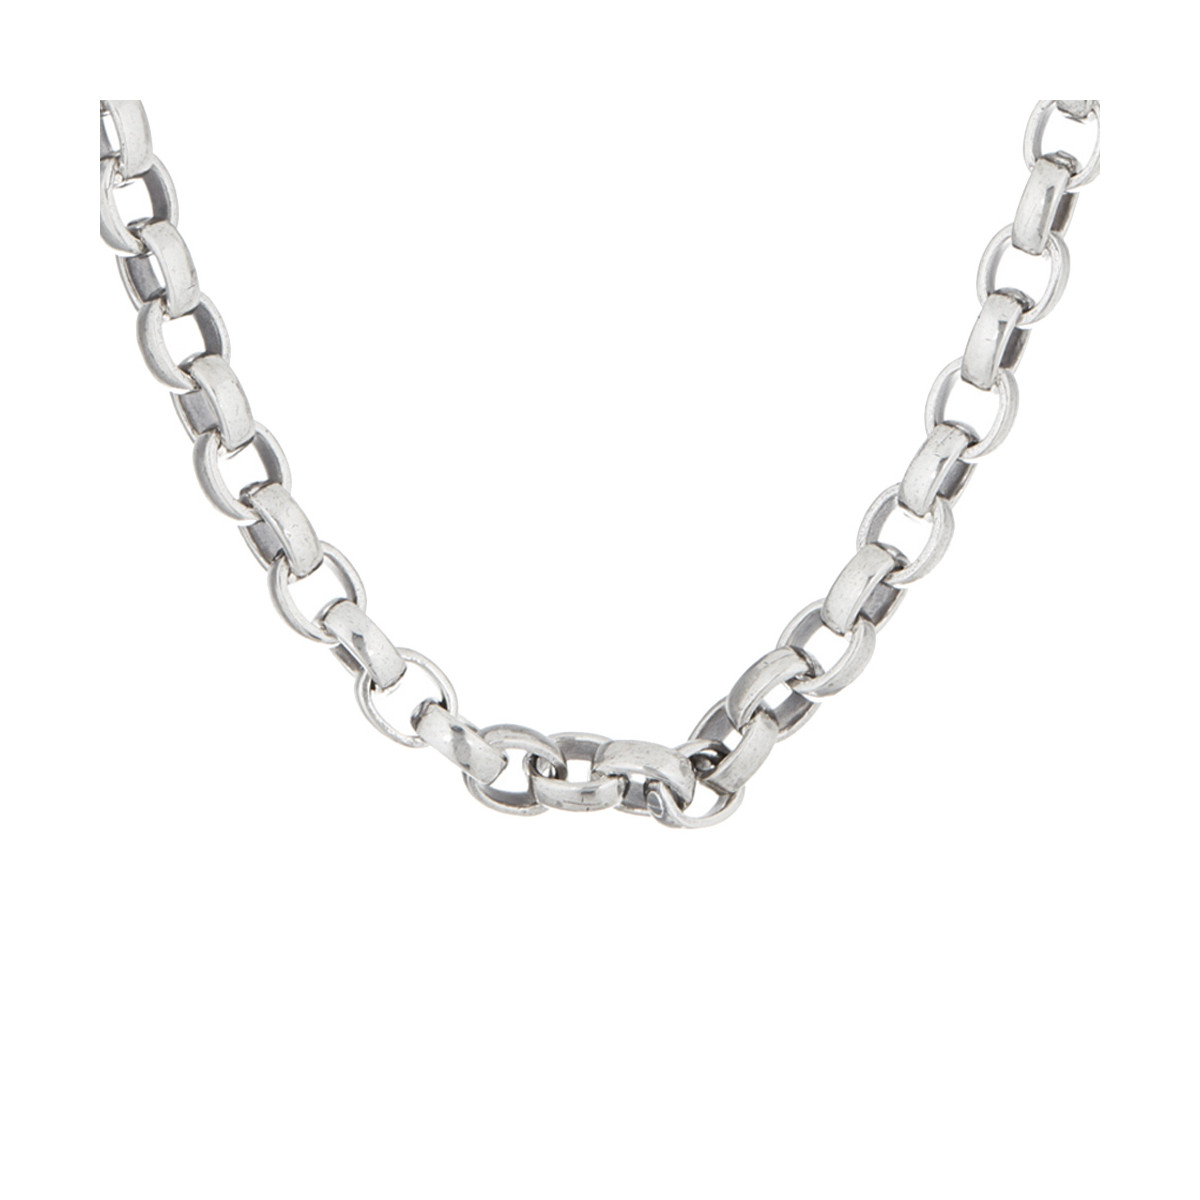 Collier Homme "Rony" Argent 925/1000